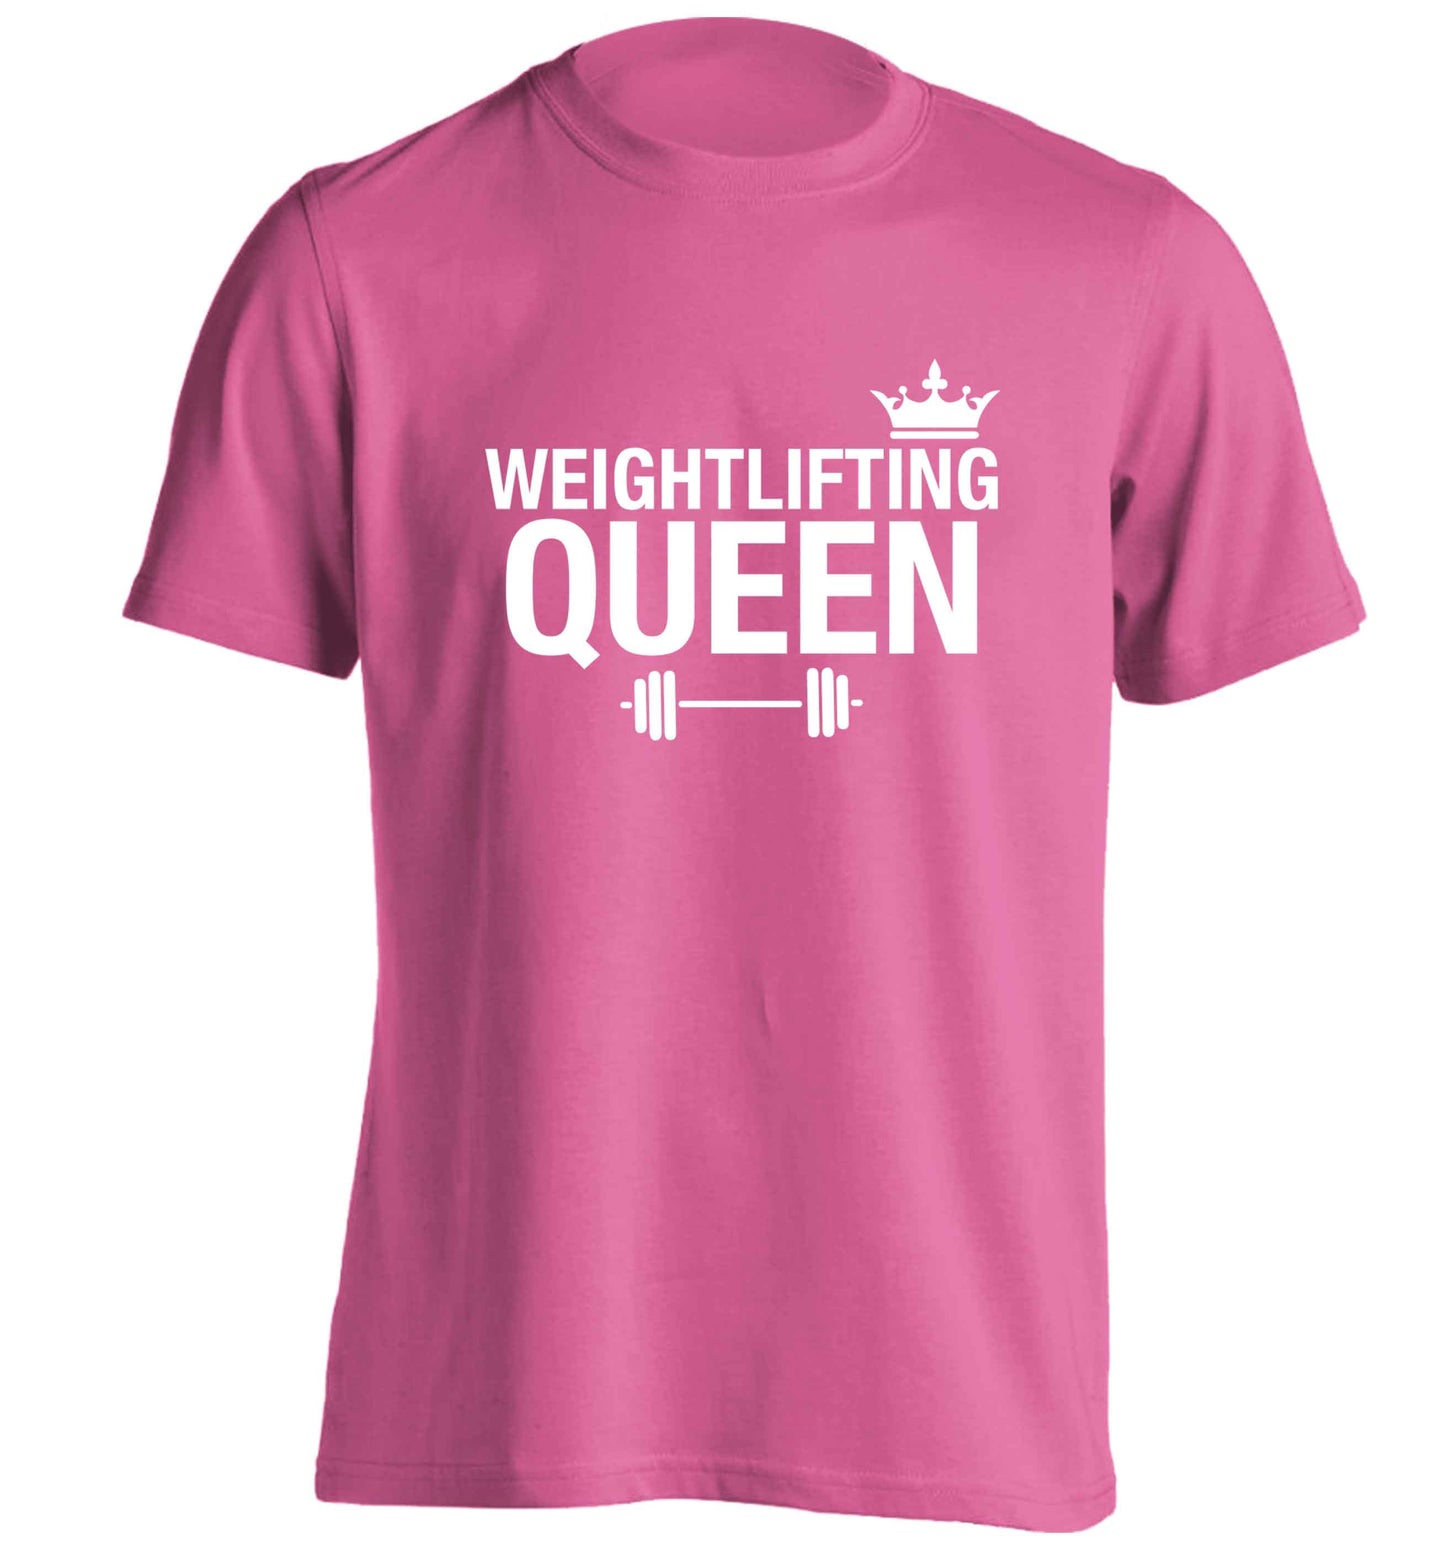 Weightlifting Queen adults unisex pink Tshirt 2XL